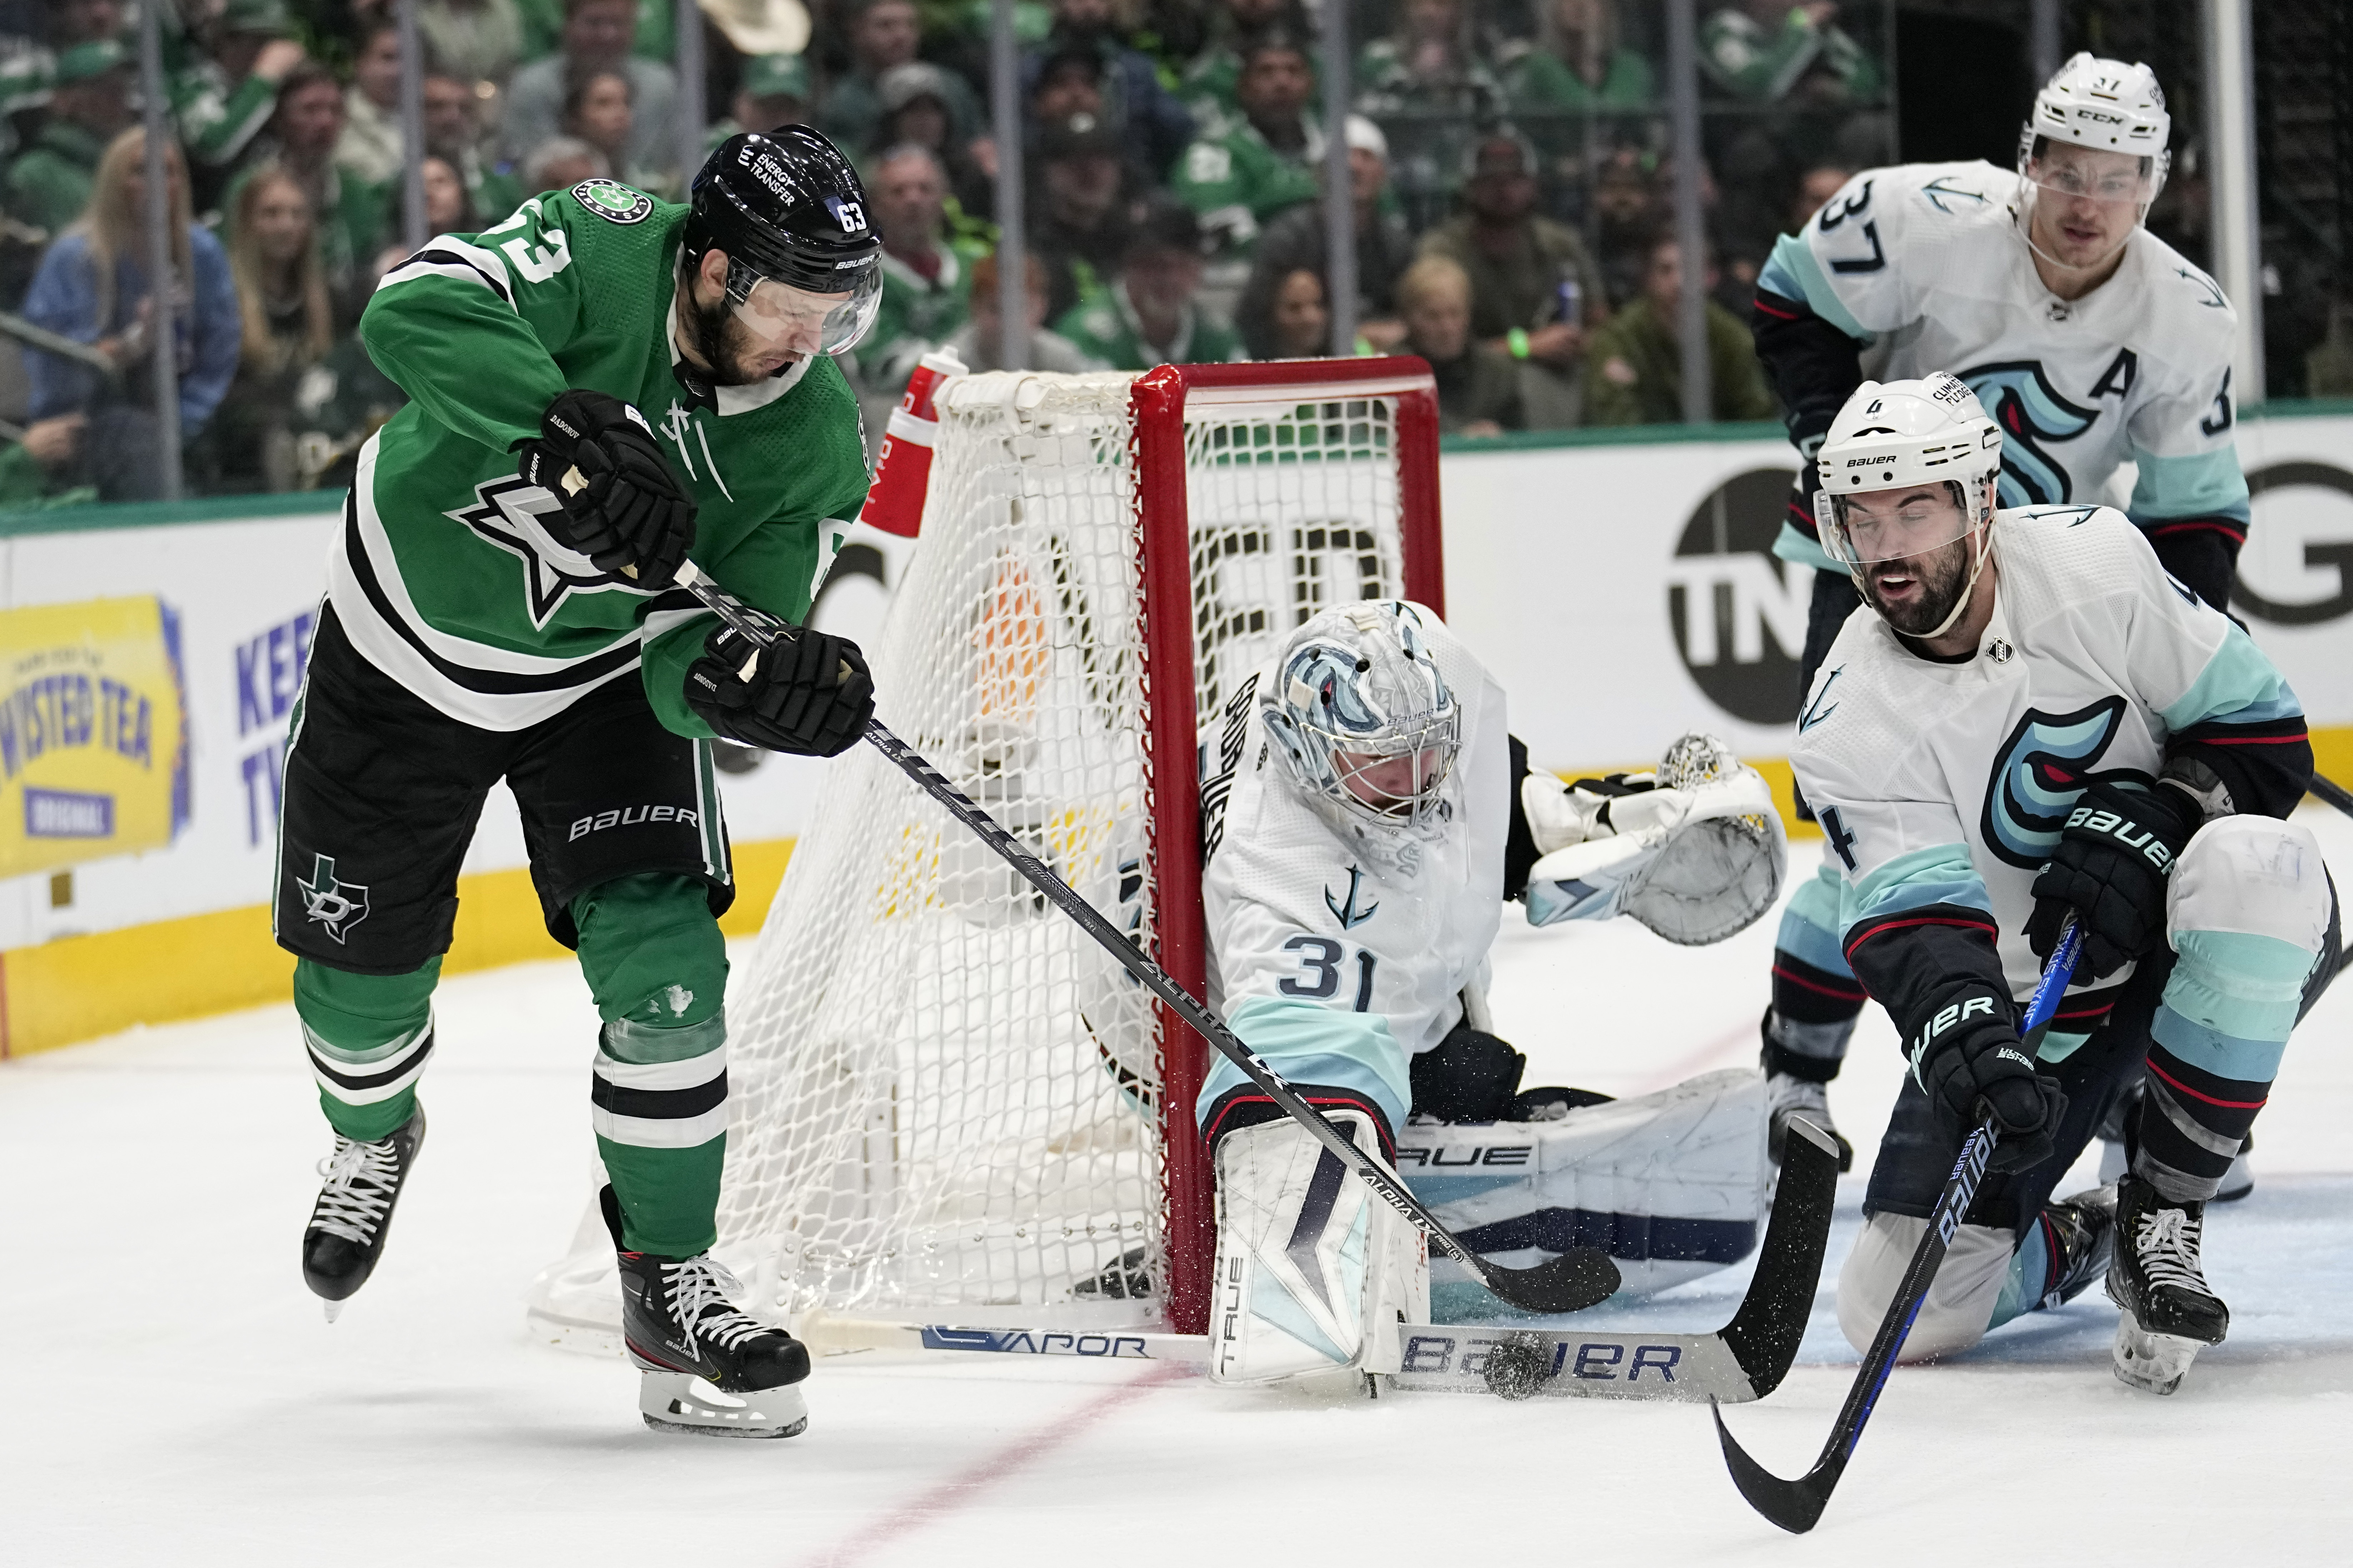 Dallas Stars at Seattle Kraken Game 4 Live stream, TV channel and odds